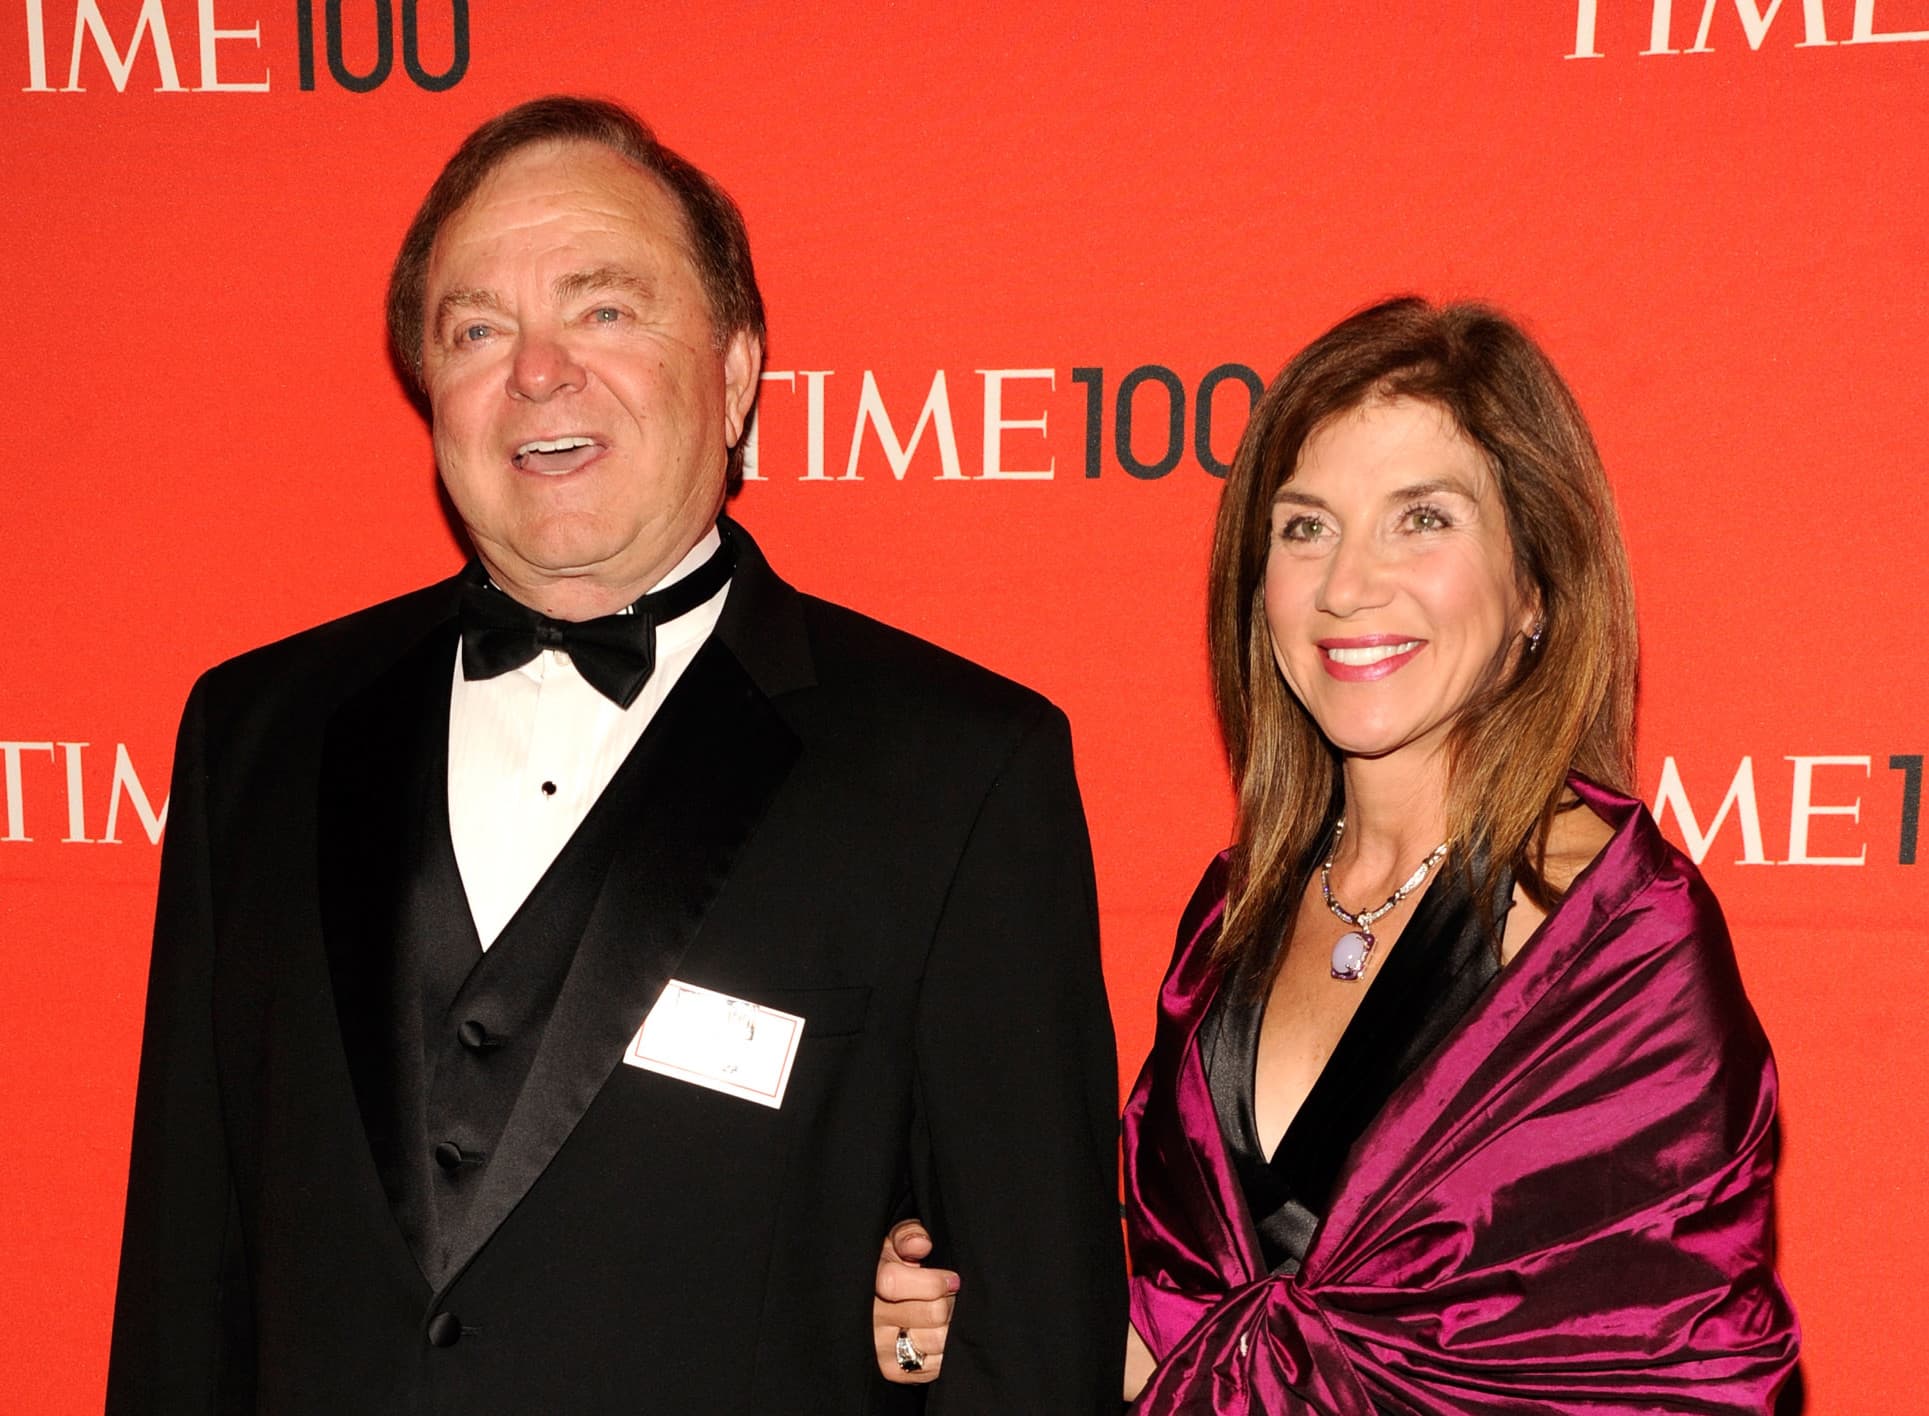 Harold Hamm and Sue Ann Arnall- Expensive Divorces in the world